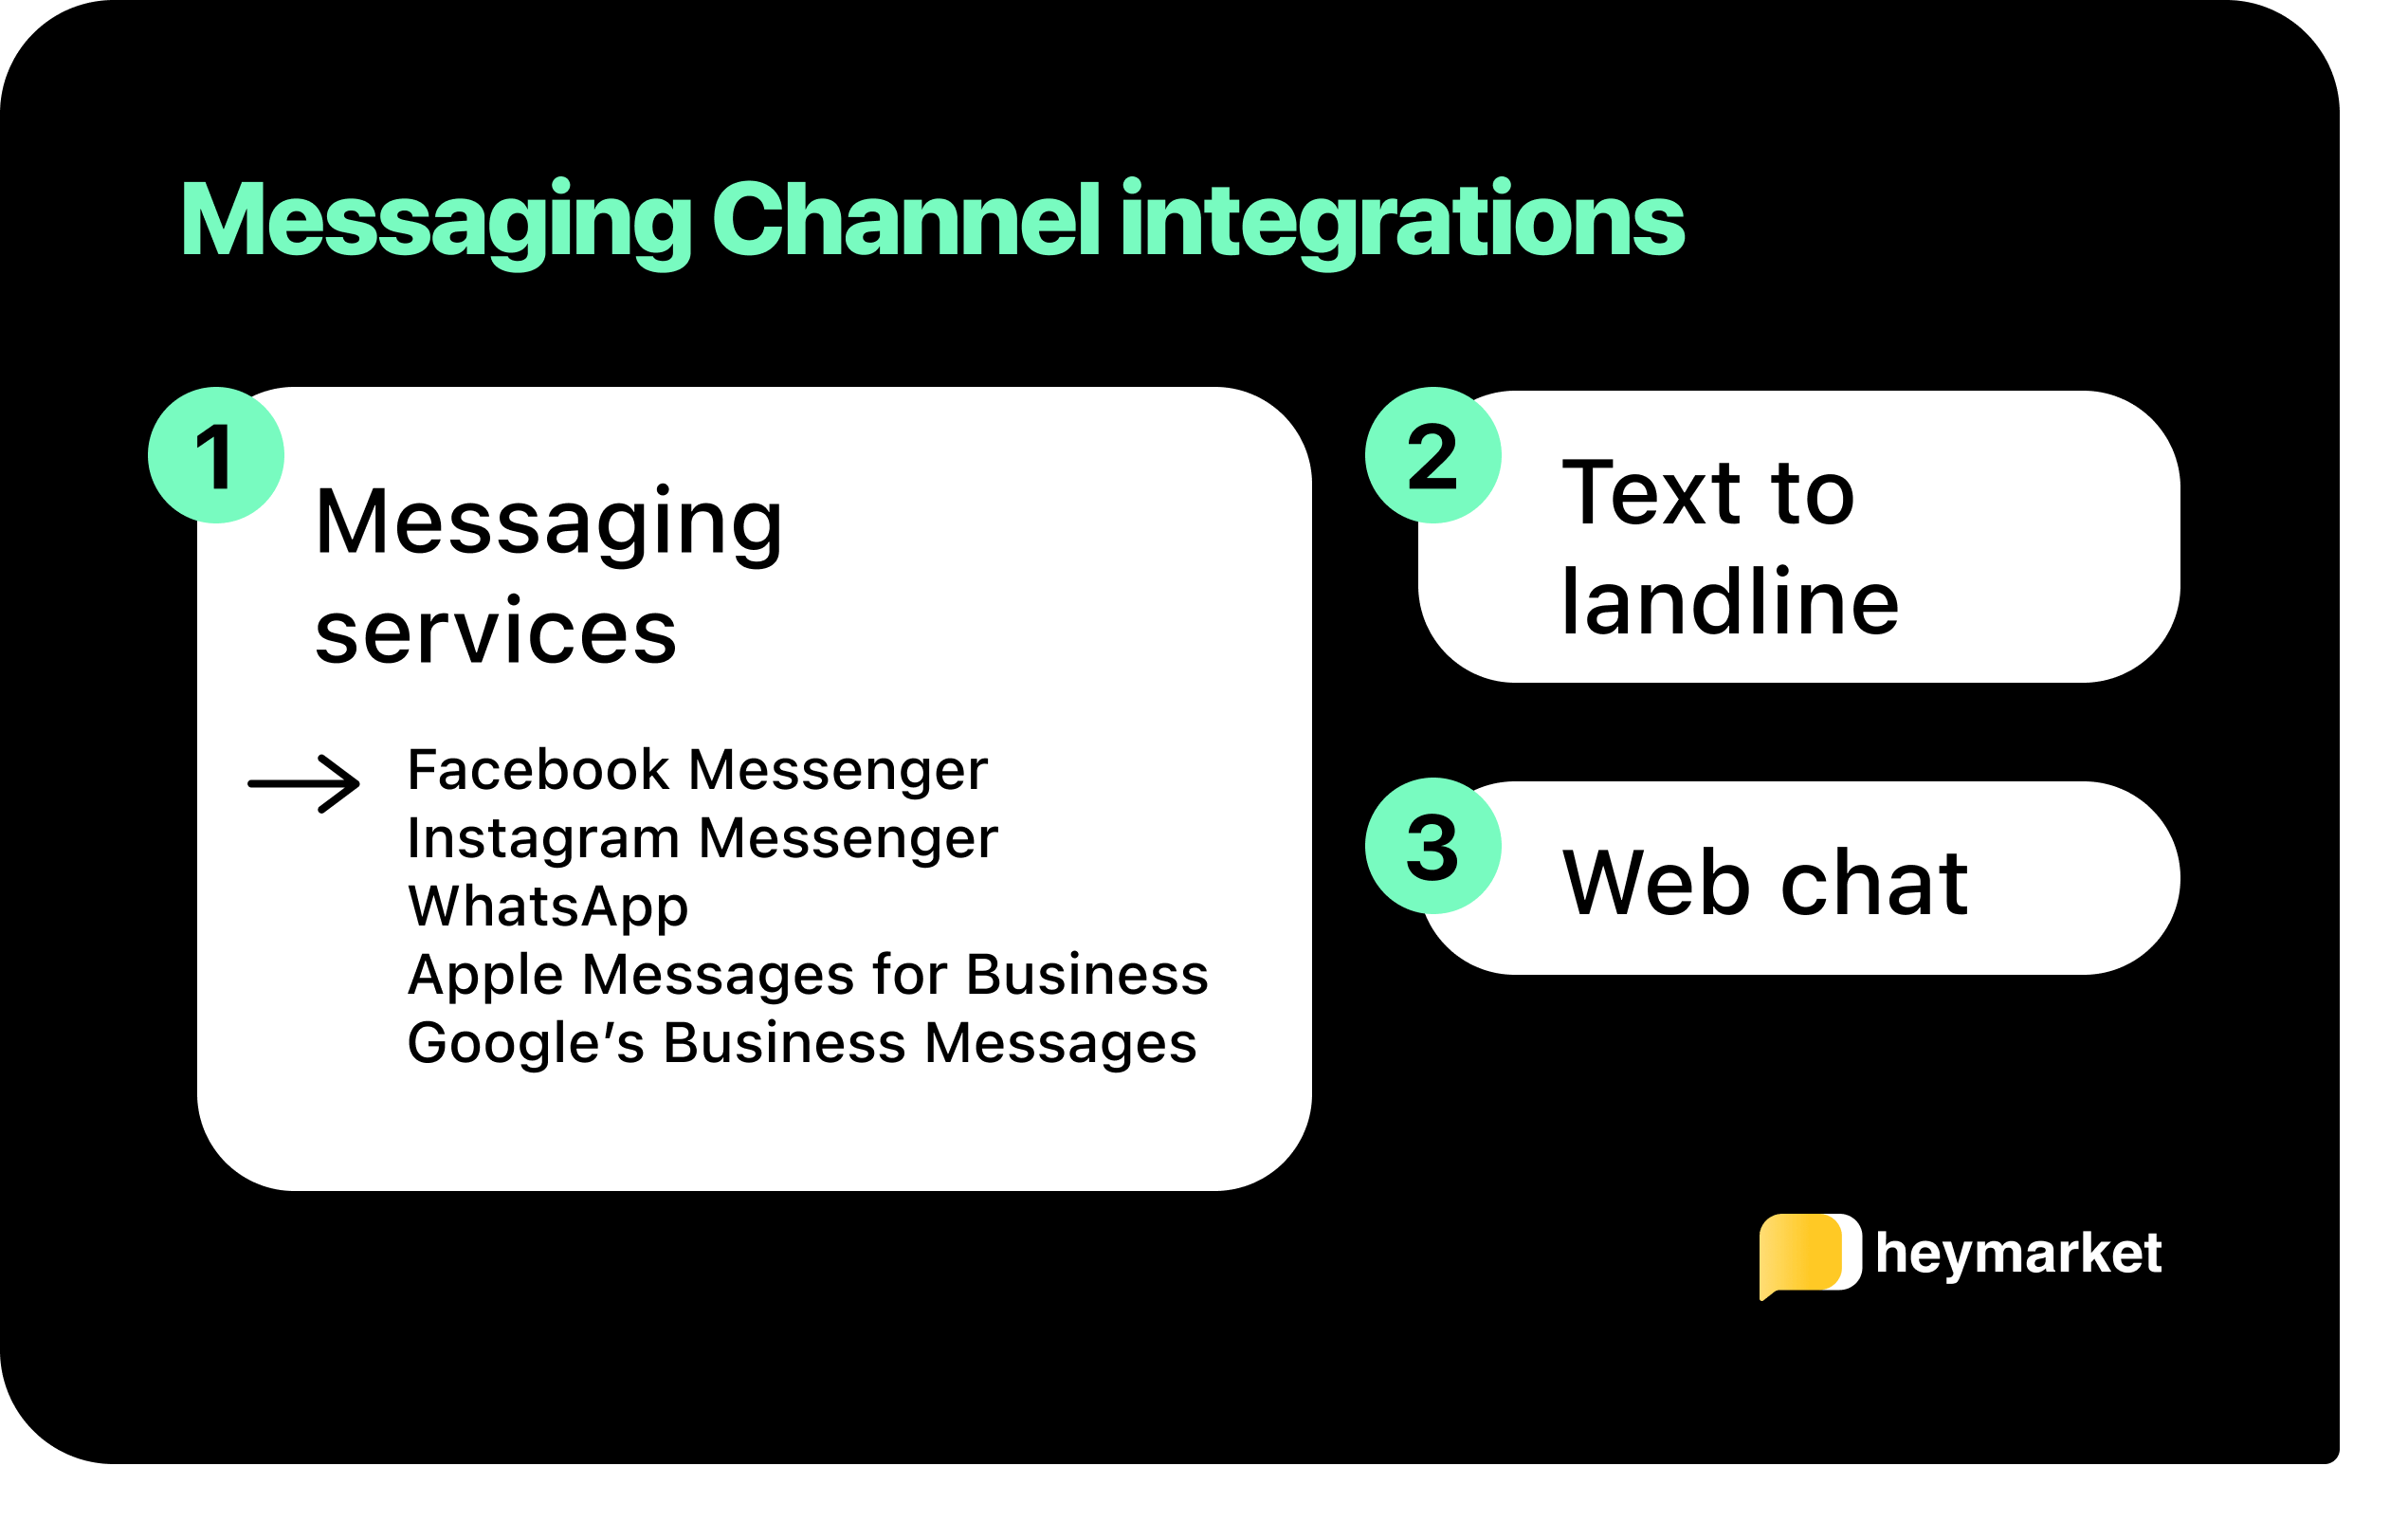 List of messaging channel integrations